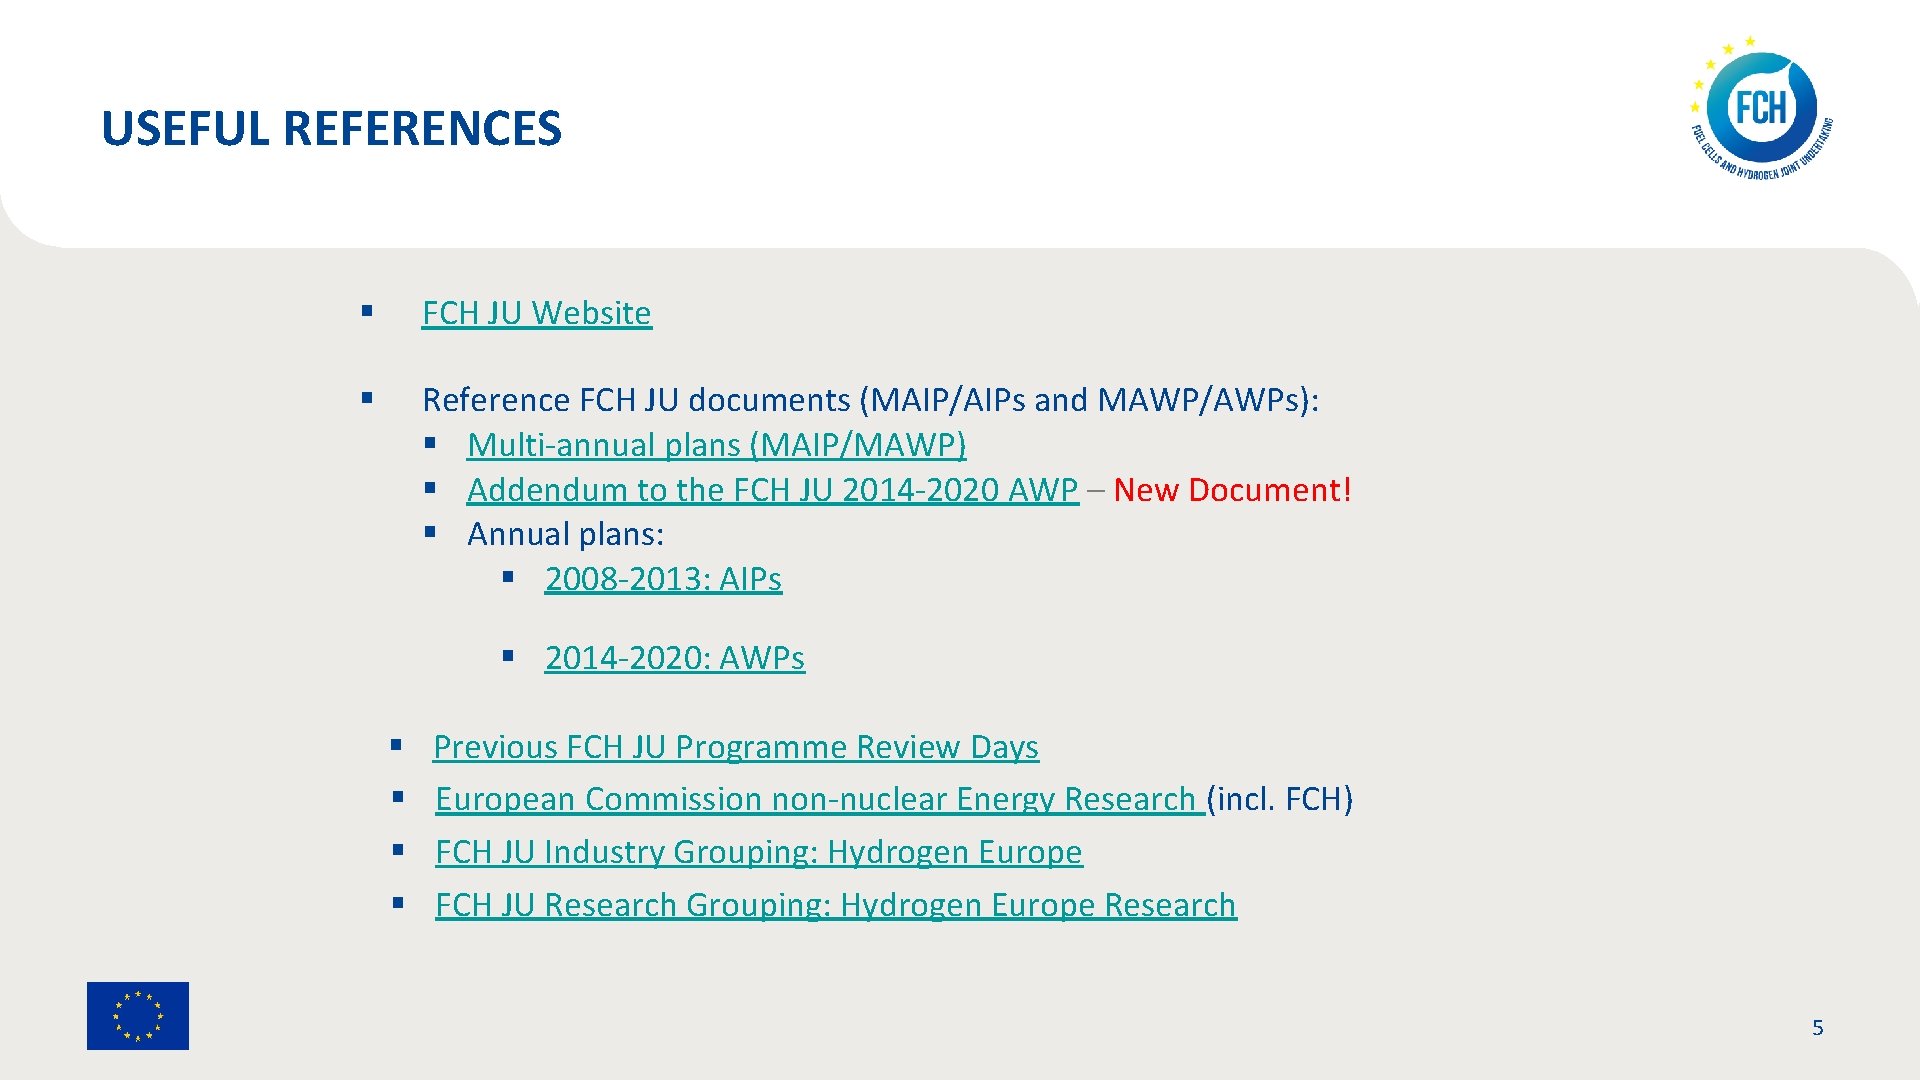 USEFUL REFERENCES § FCH JU Website § Reference FCH JU documents (MAIP/AIPs and MAWP/AWPs):